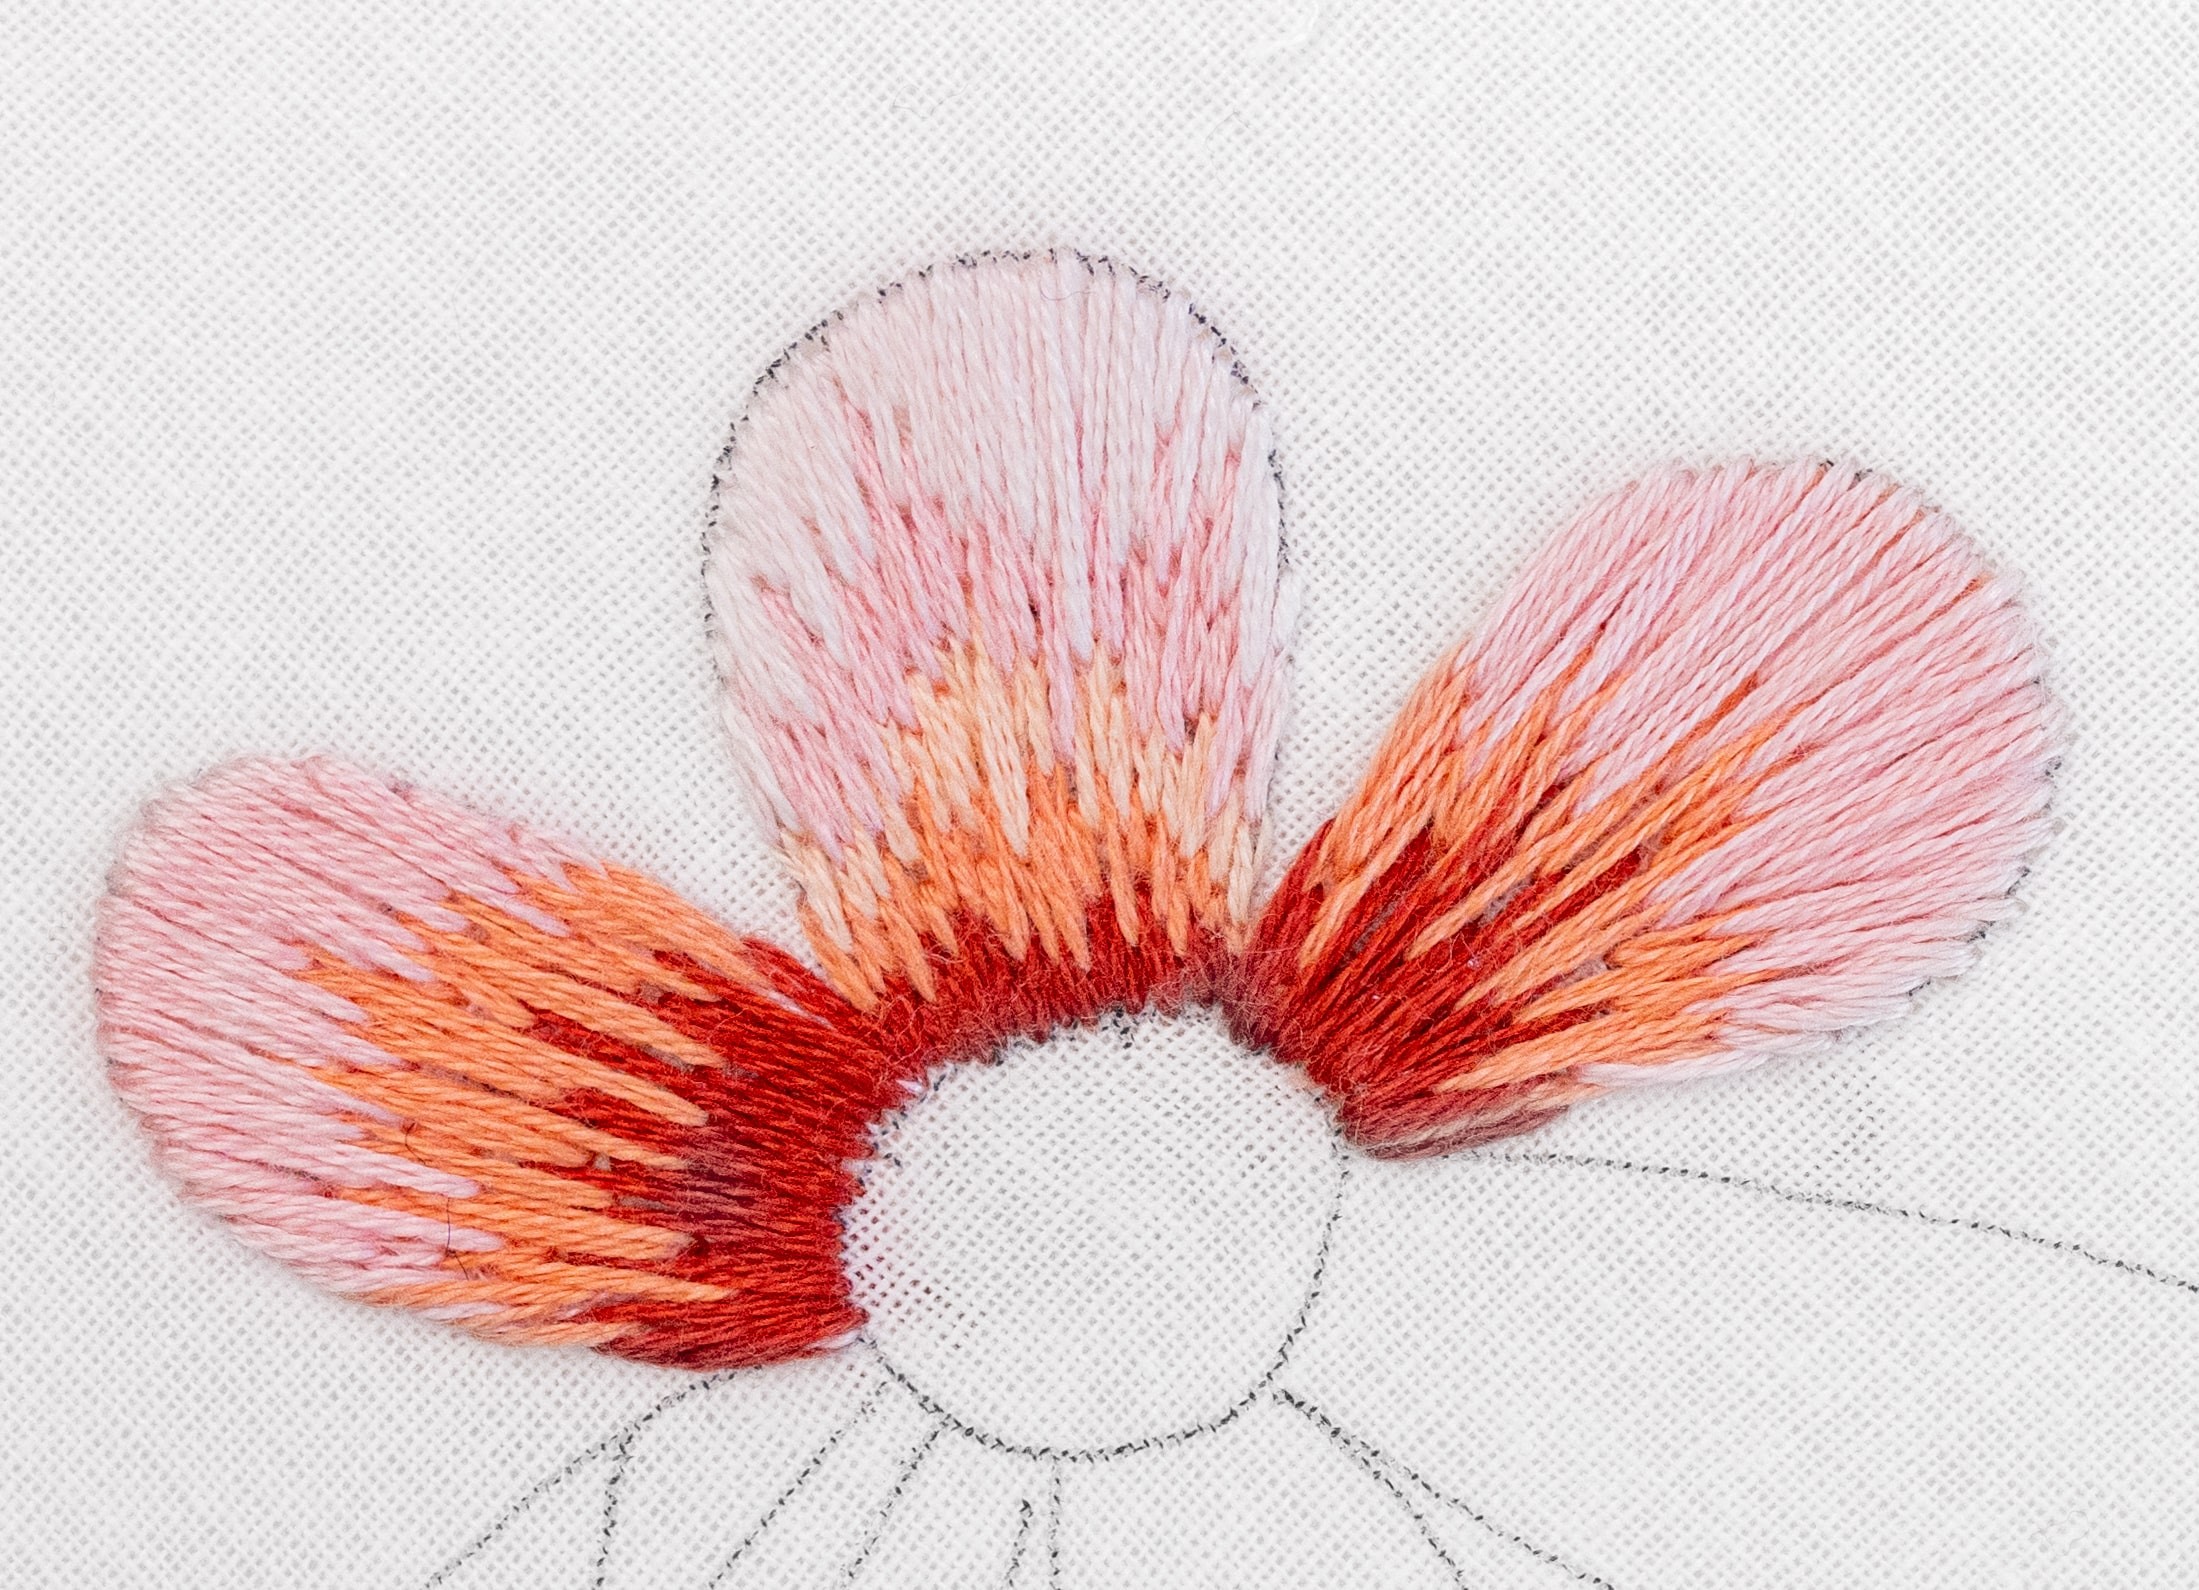 This is an image of flower petals stitched with Long and Short Stitch.